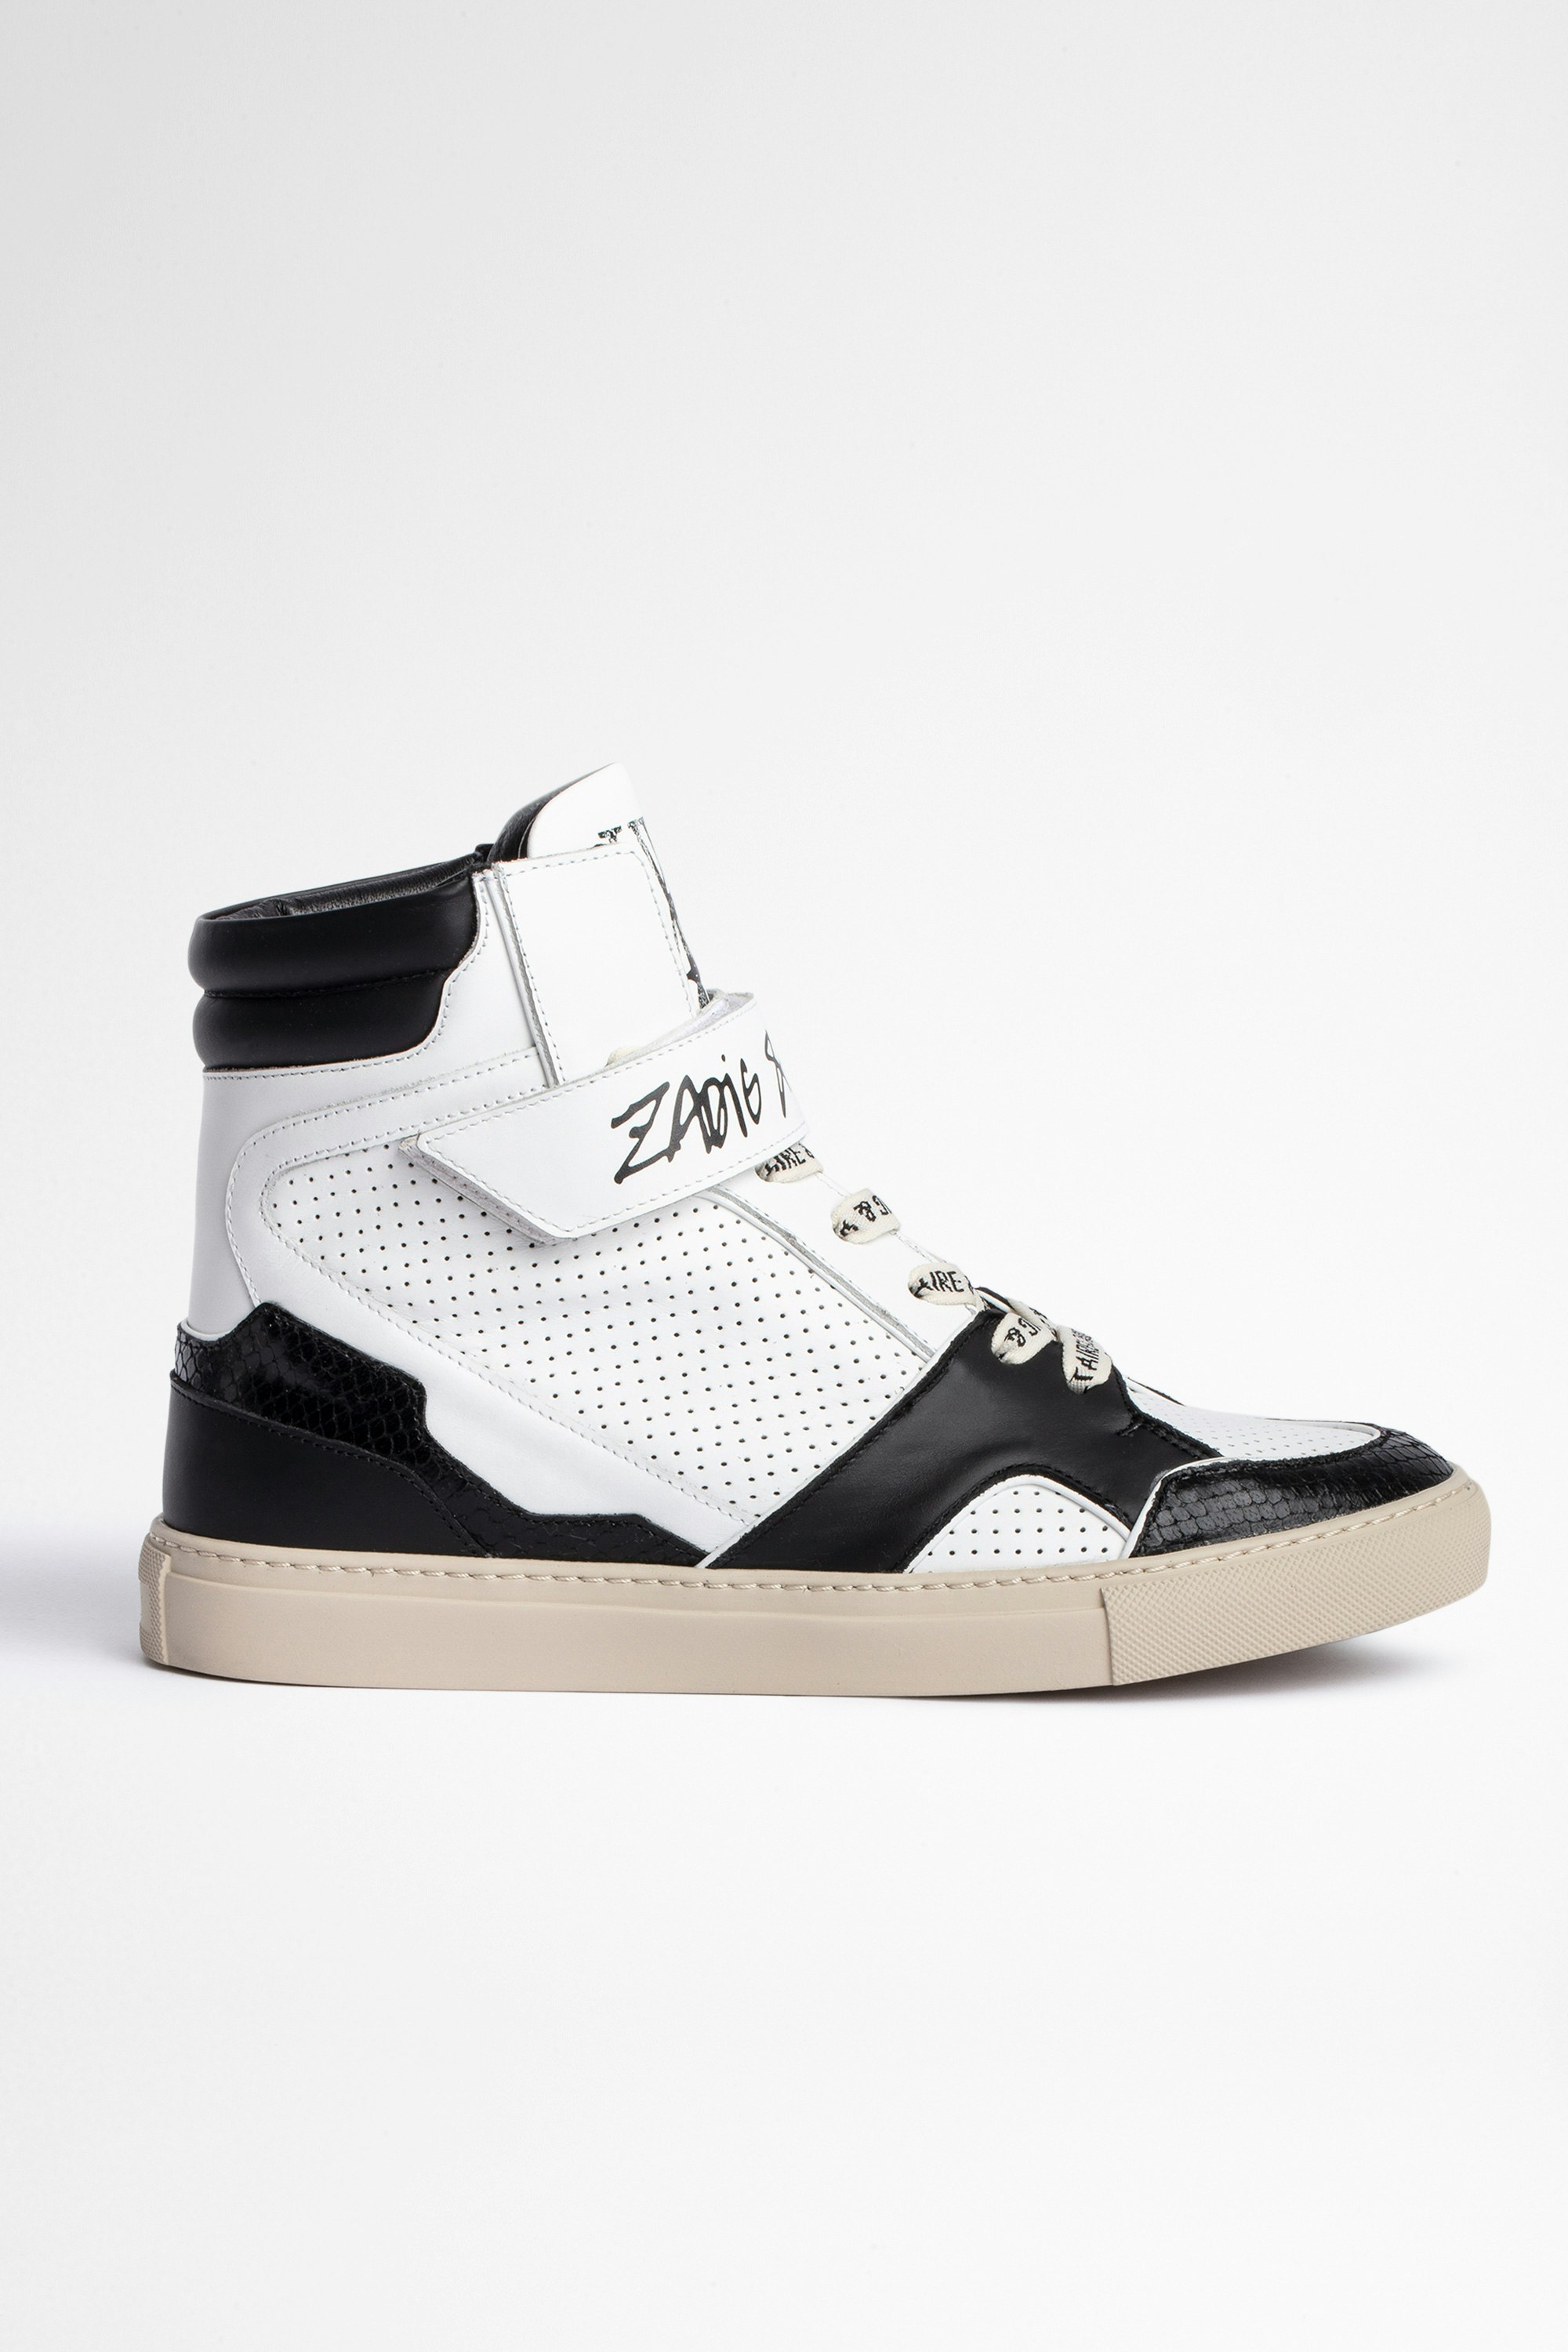 ZV1747 High Flash スニーカー Women's high-top trainers in bicolored leather. Buying this product, you support a responsible leather production through Leather Working Group.